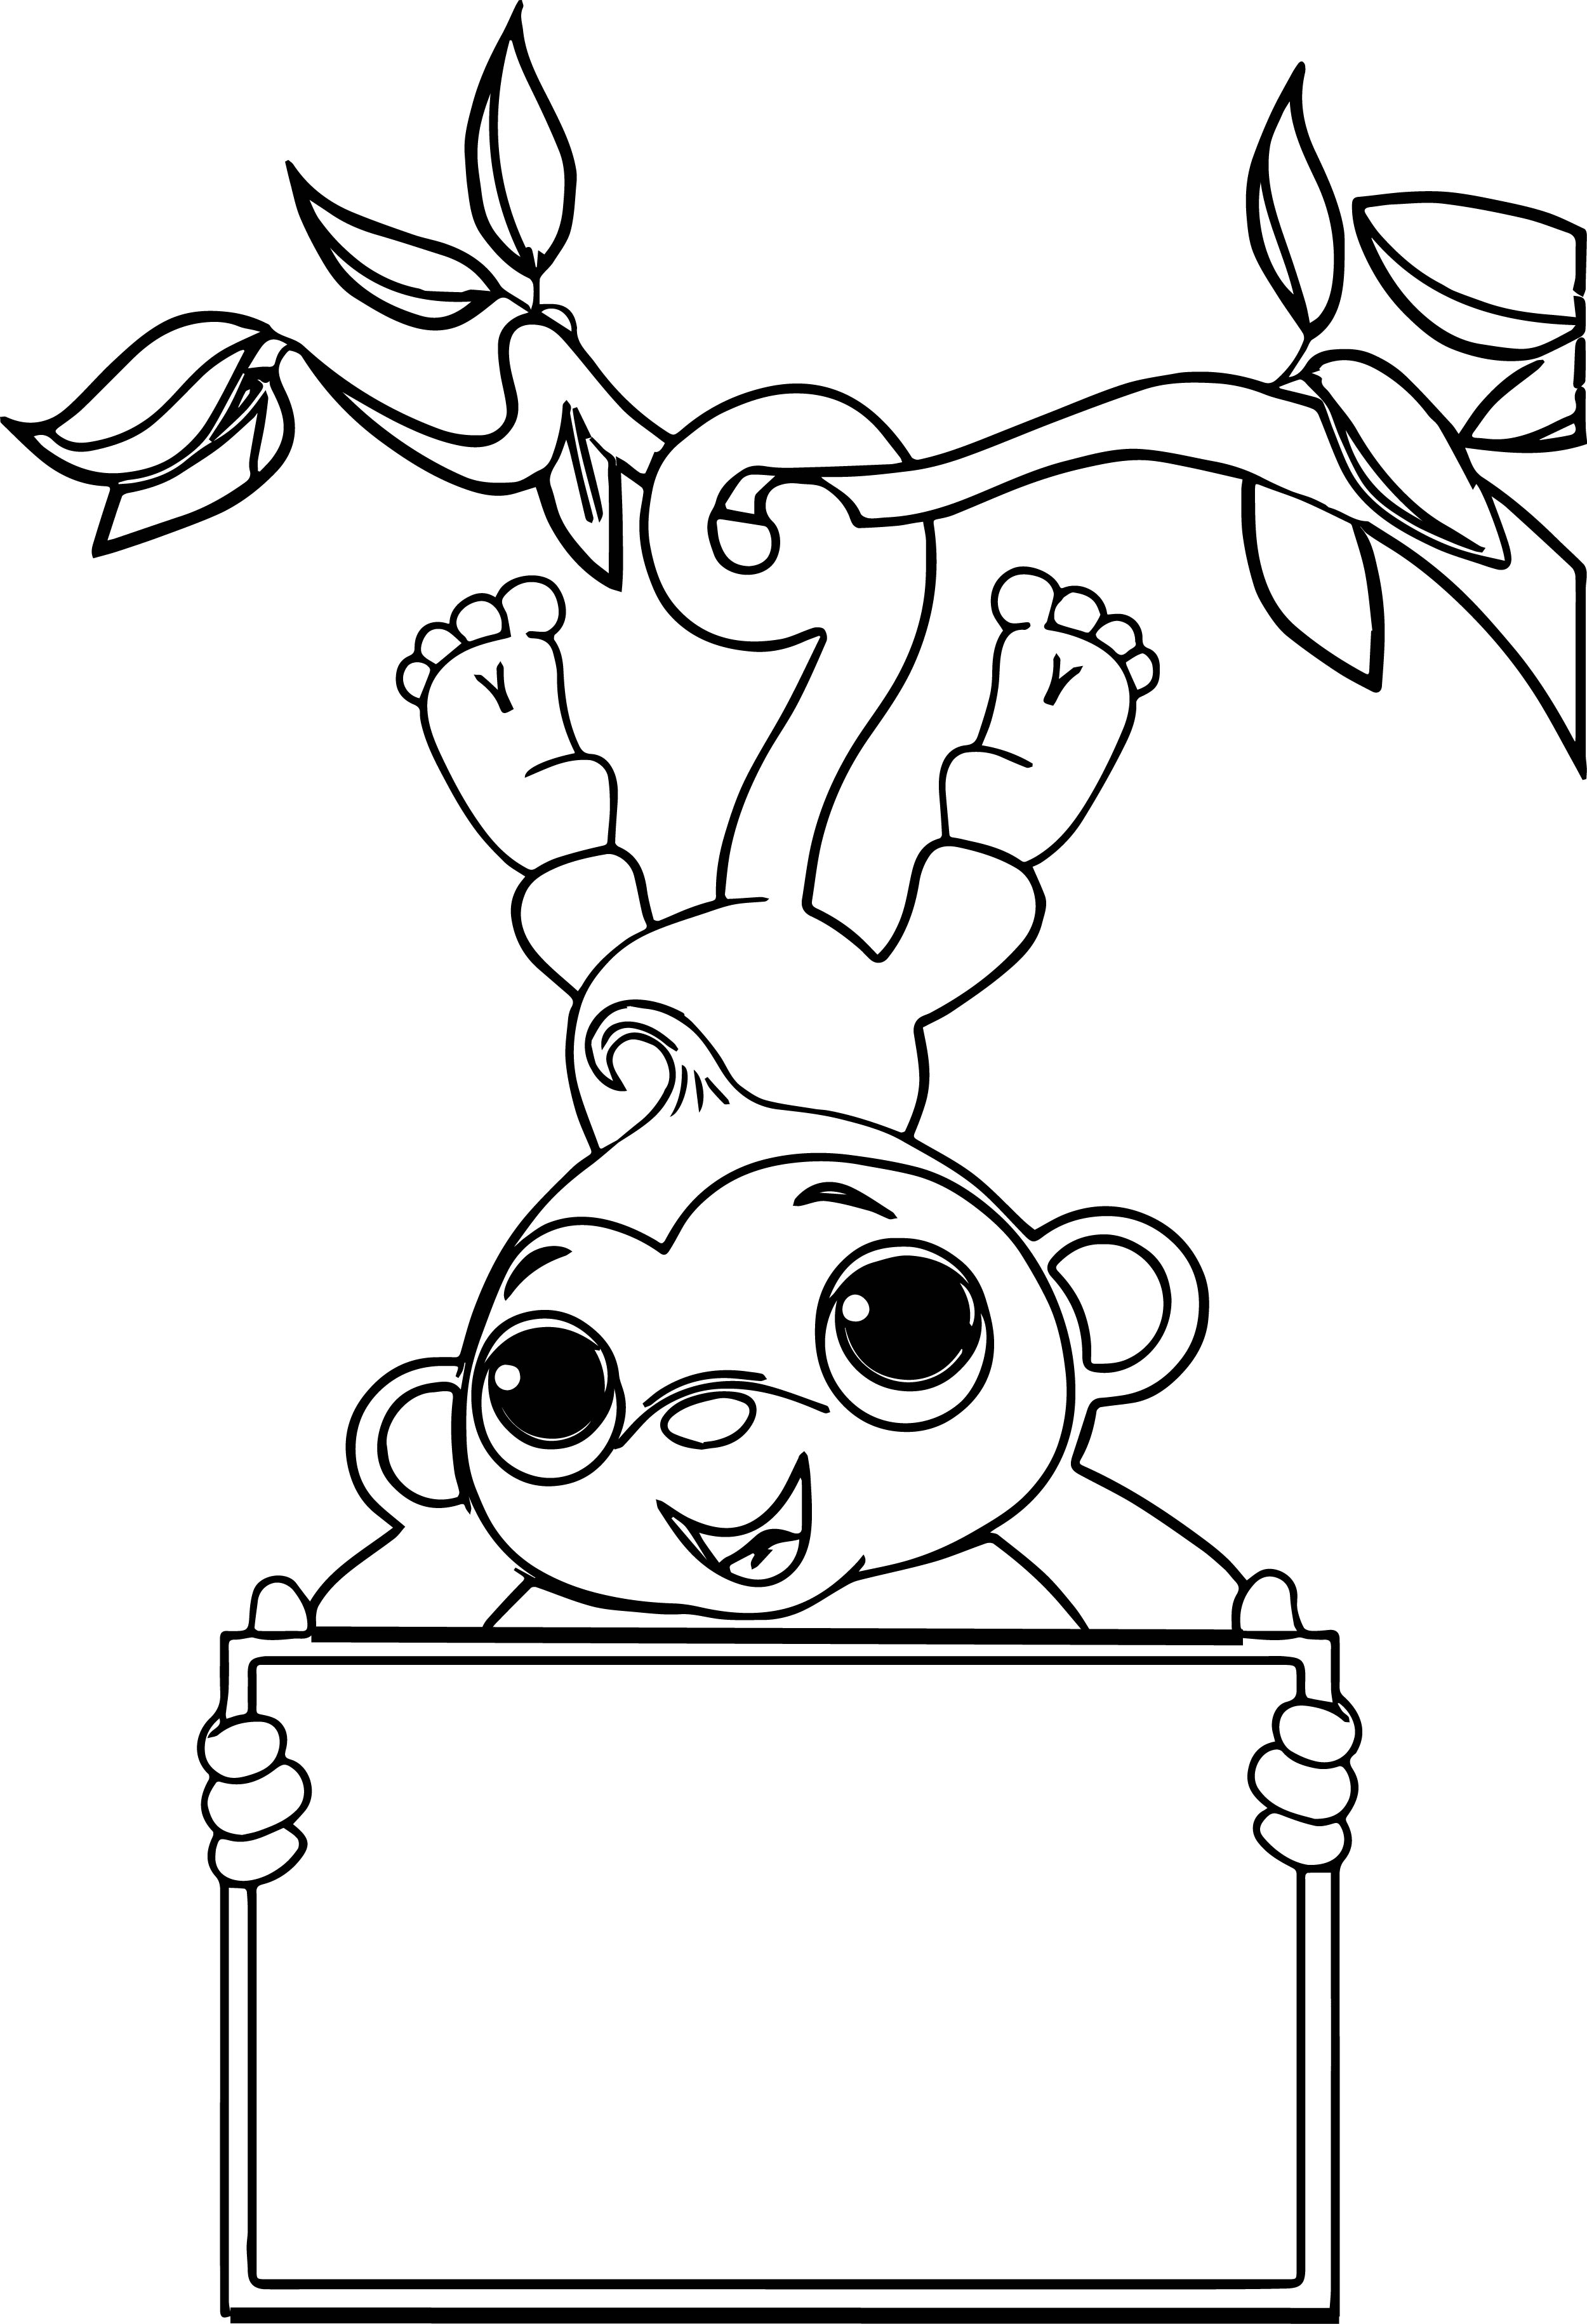 Sock Monkey Coloring Page Sock Coloring Page Zoo Free Sock Monkey Coloring Page Wecoloringpage